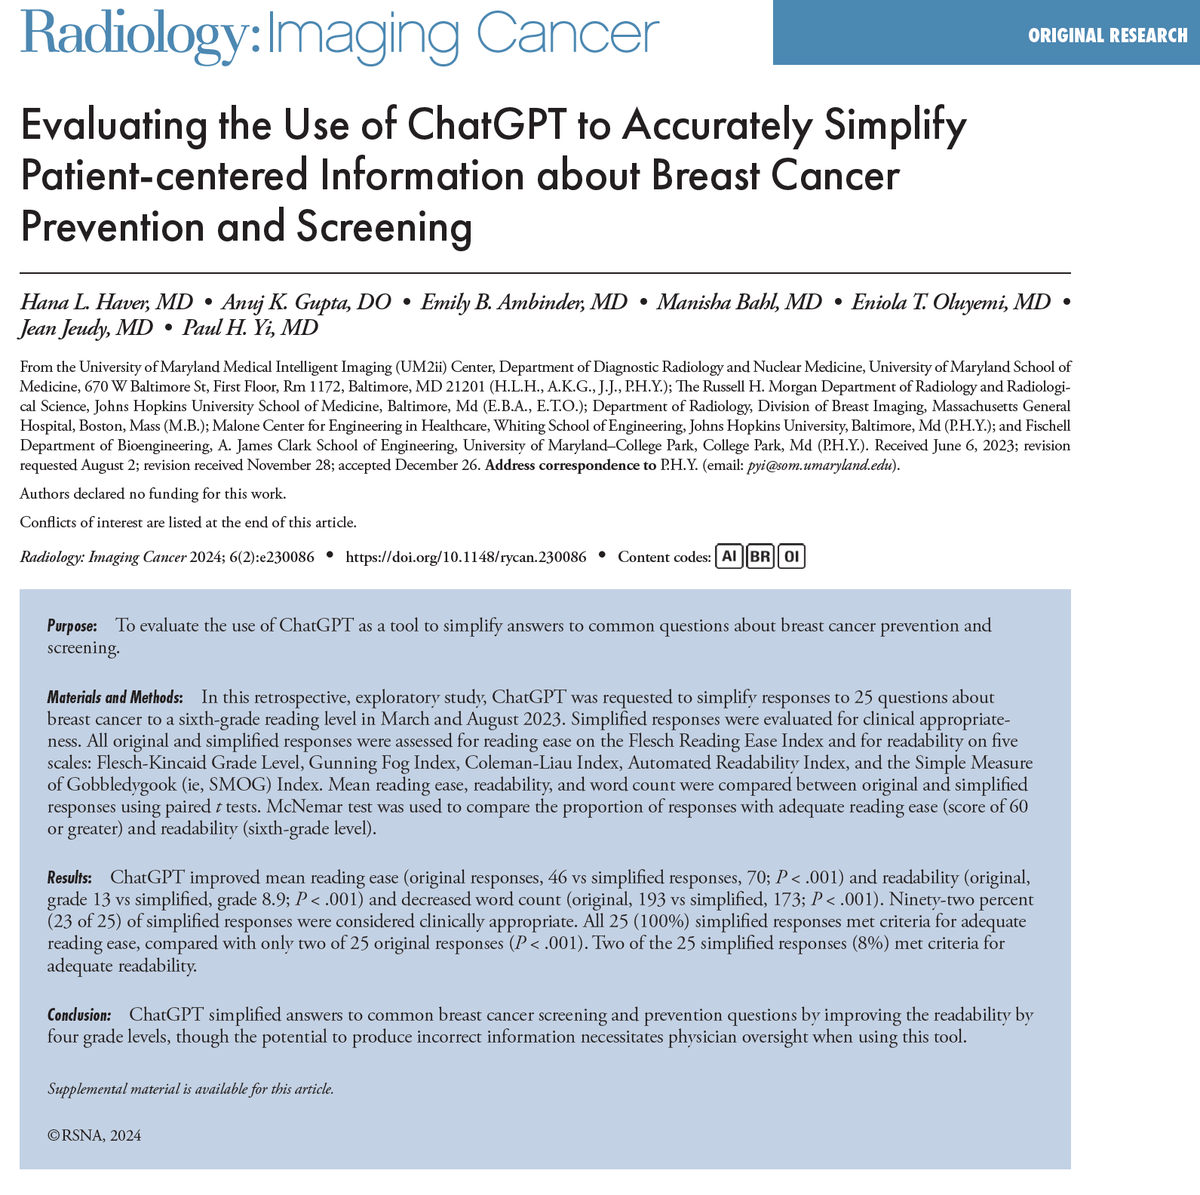 Hot off the press from Radiology: Imaging Cancer: 'Evaluating the Use of ChatGPT to Accurately Simplify Patient-centered Information about Breast Cancer Prevention and Screening' by Haver et al. Article: doi.org/10.1148/rycan.… #CancerImaging #Cancer